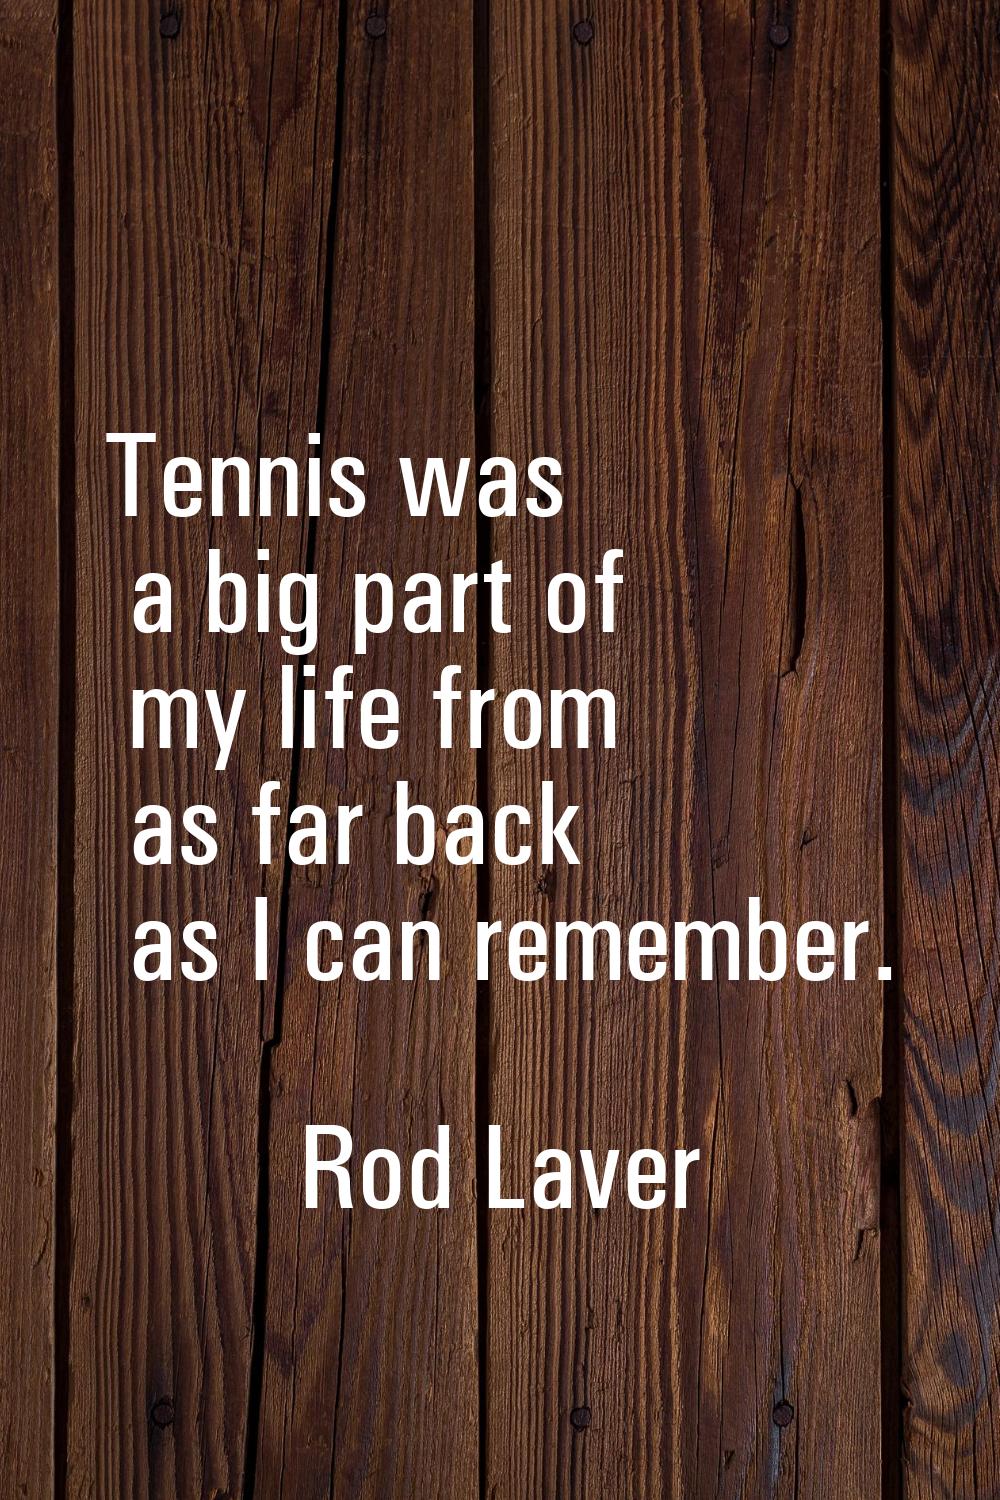 Tennis was a big part of my life from as far back as I can remember.